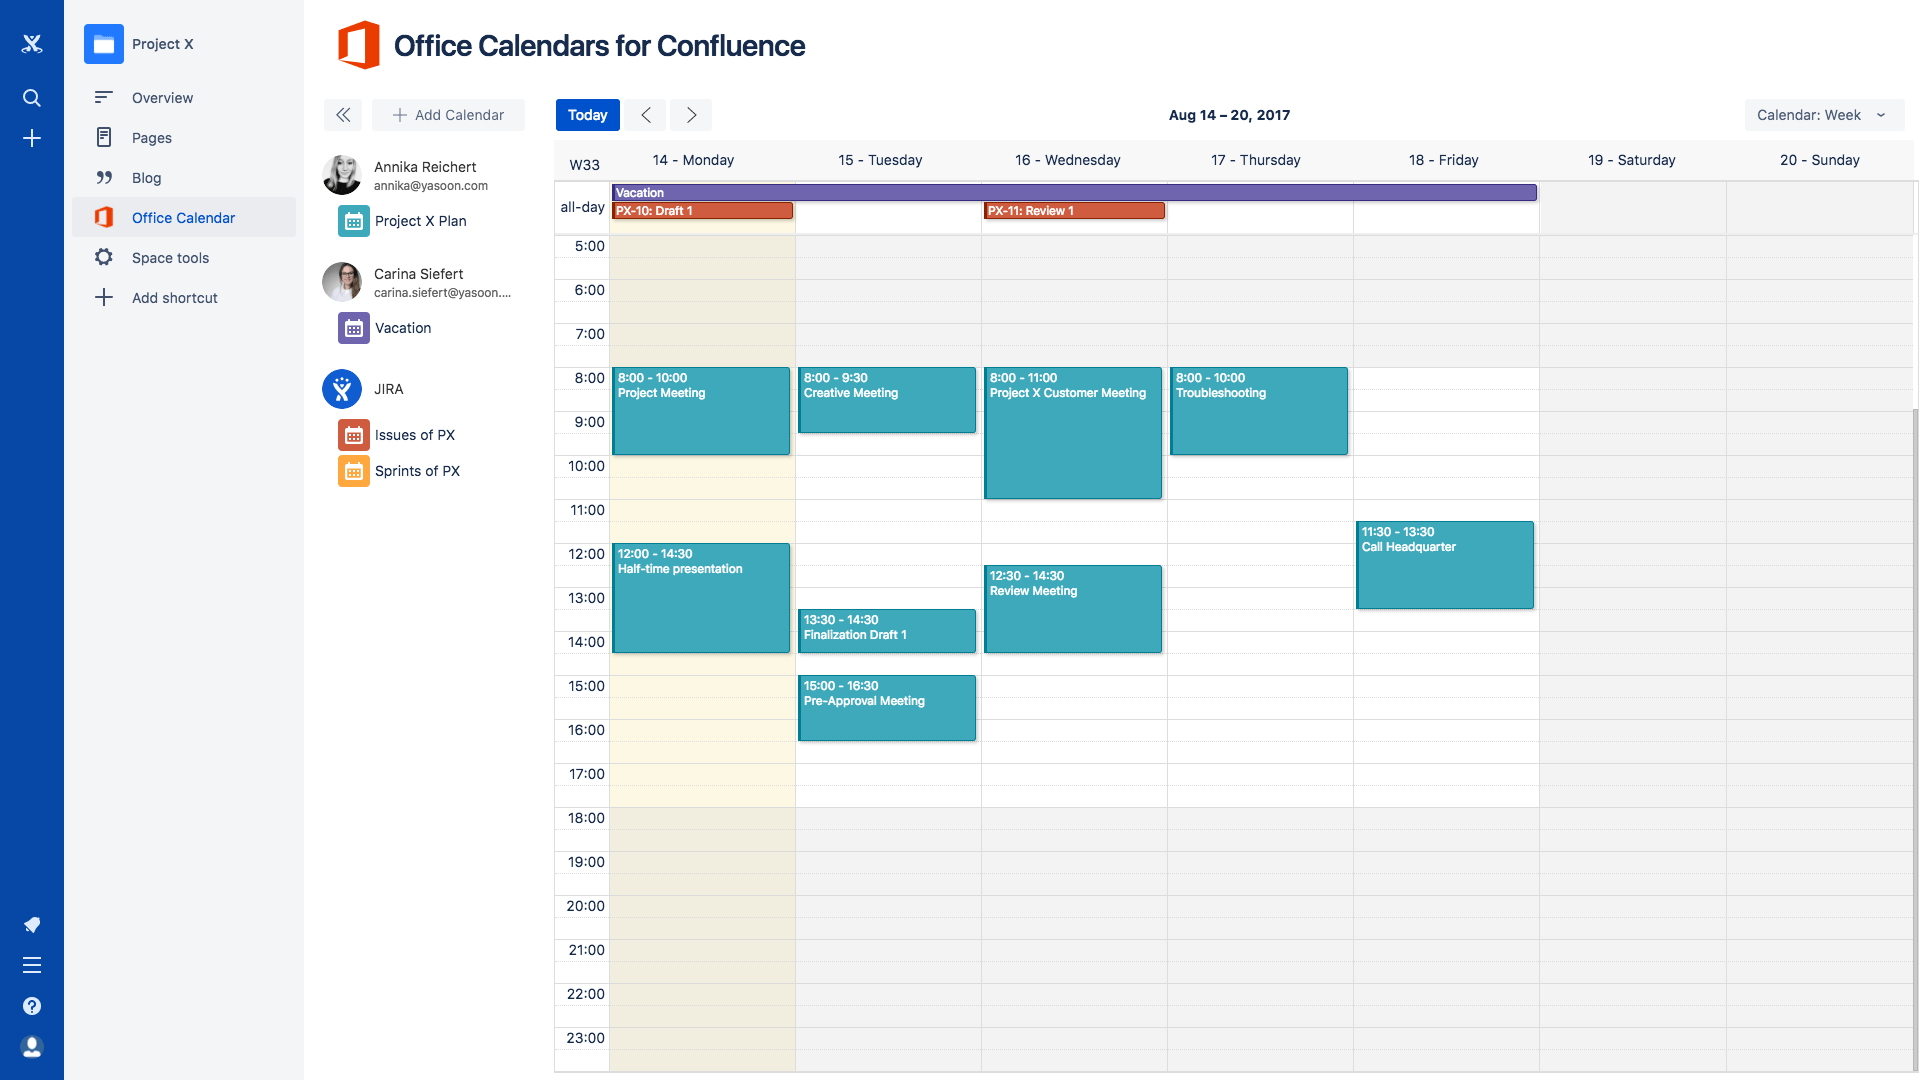 Office Calendars for Confluence